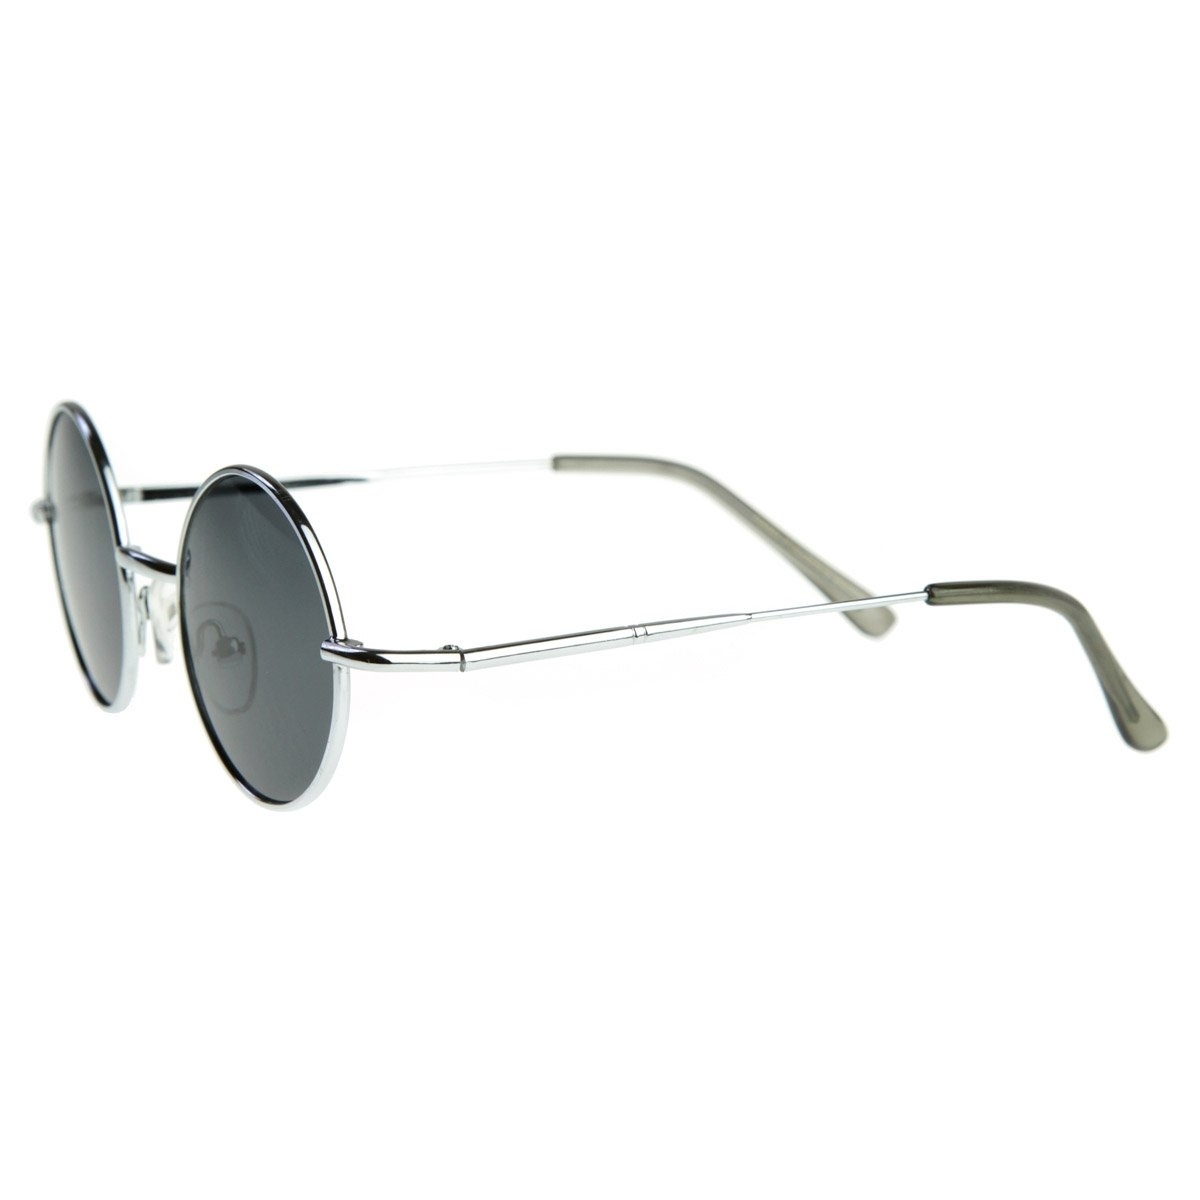 Small Retro-Vintage Style Lennon Inspired Round Metal Circle Sunglasses - Silver Ice